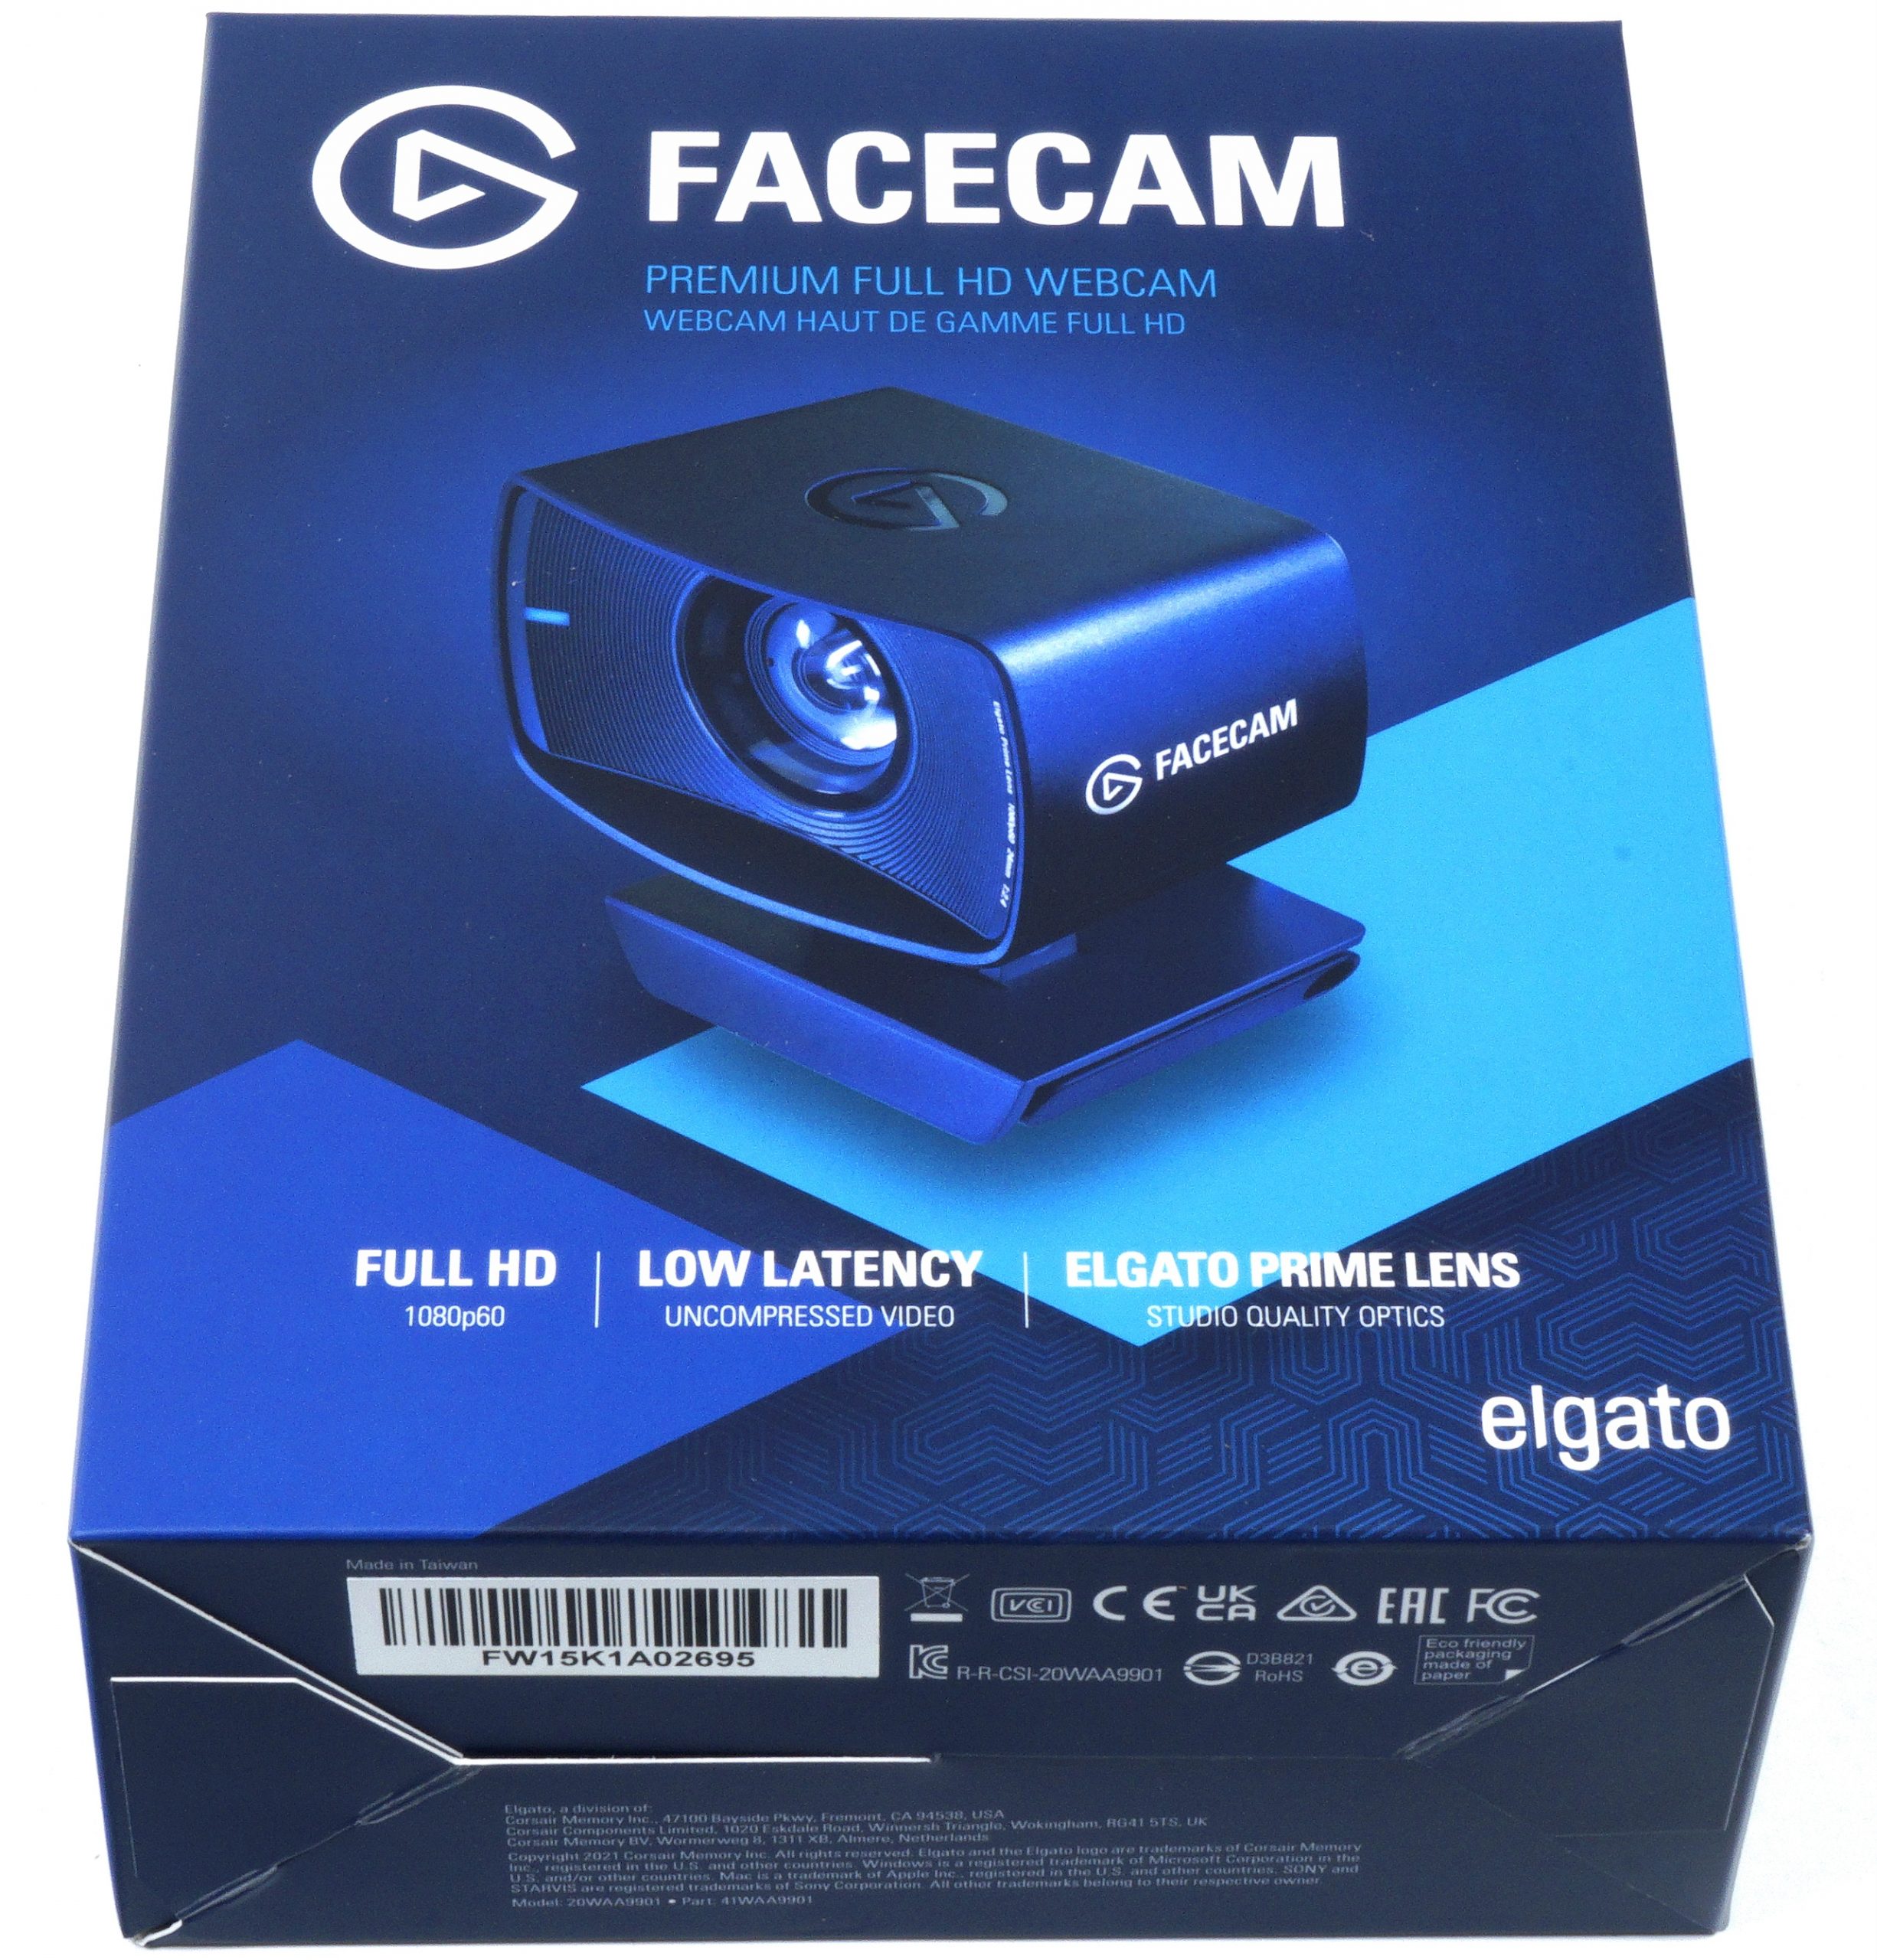 Elgato Facecam is facing the wrong way. How do I fix this? : r/elgato